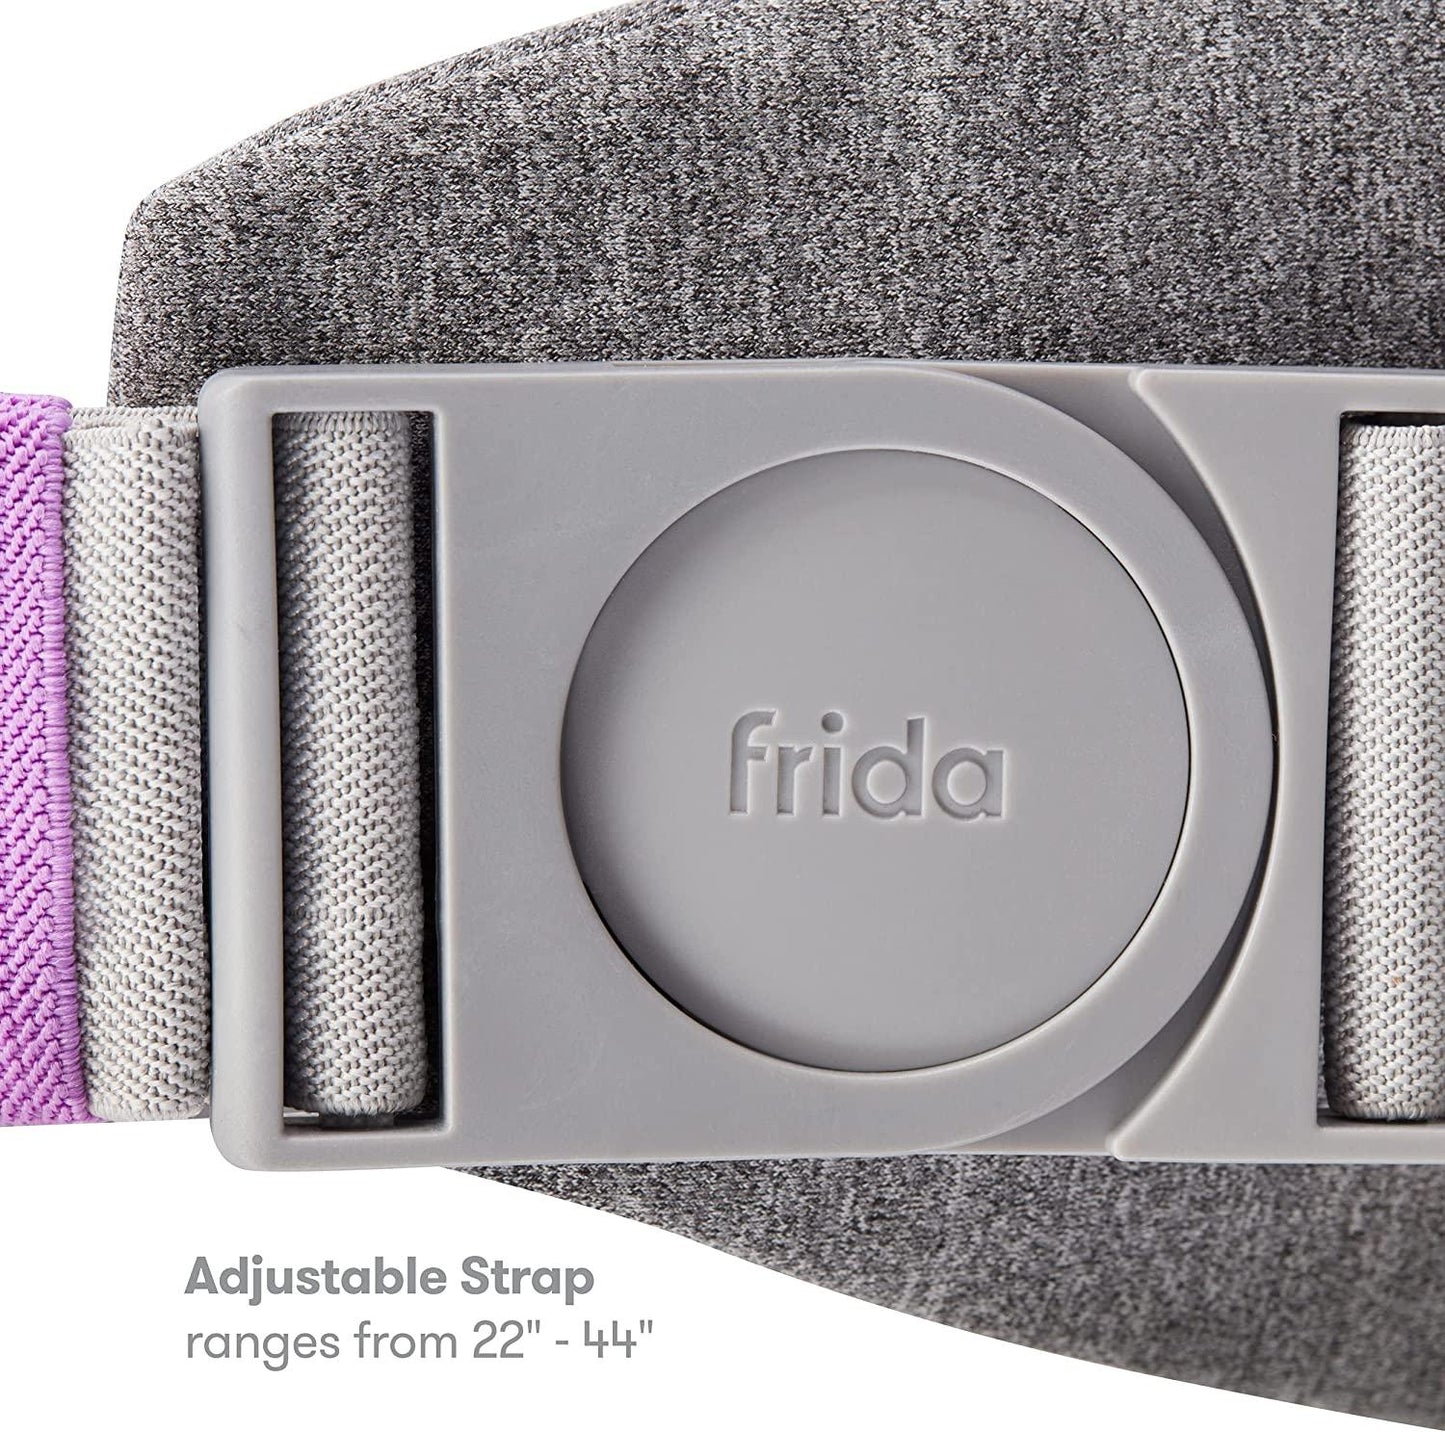 Frida Mom - C-Section Recovery Band